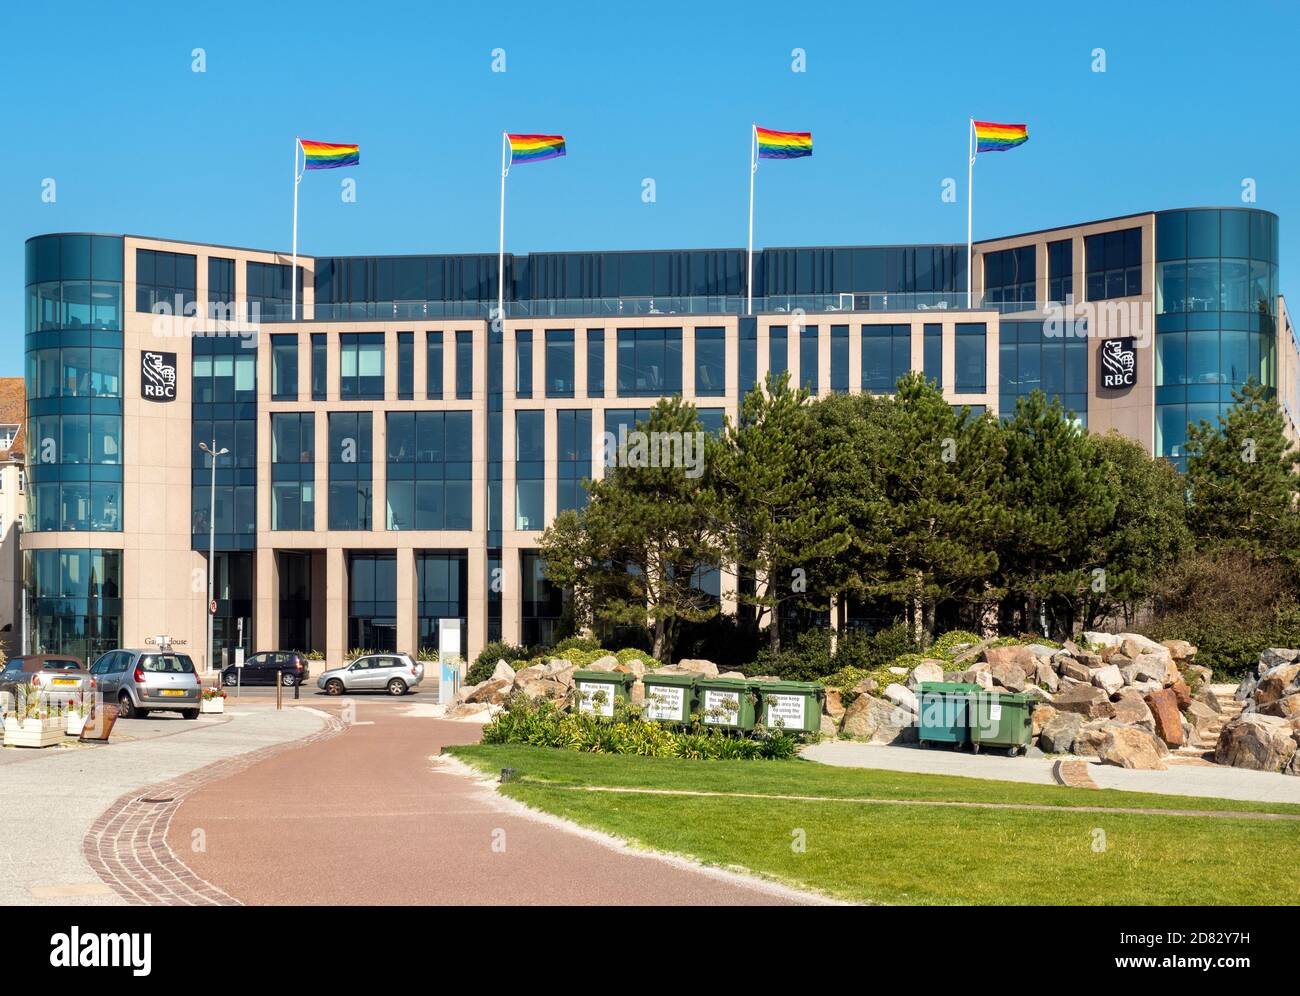 Royal Bank of Canada - RBC - St Helier, Channel Islands, UK. Stock Photo